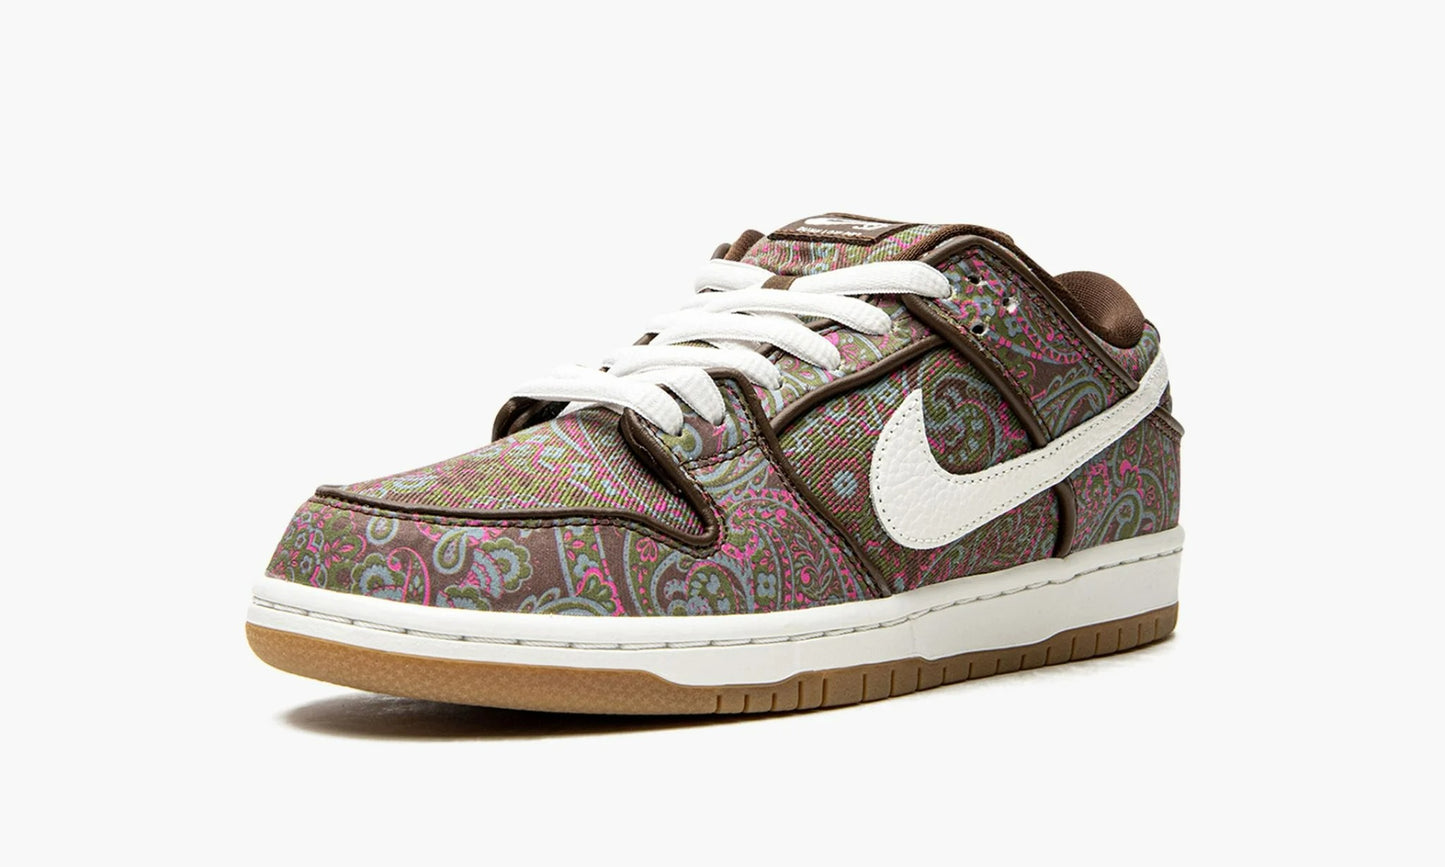 Dunk SB Low Pro Paisley Brown - DH7534 200 | The Sortage